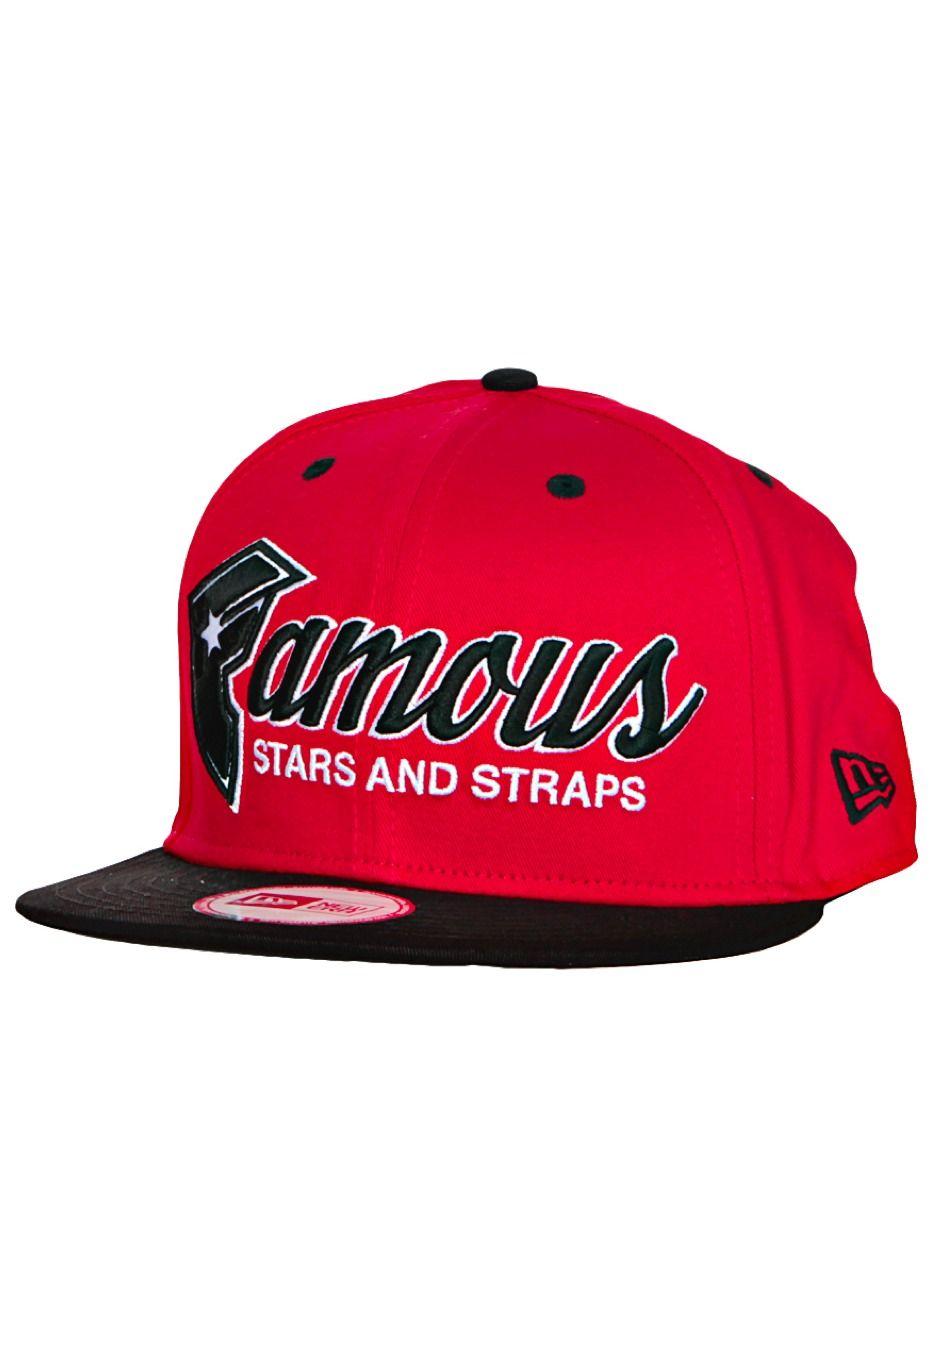 Red and Blqck Famous Logo - Famous Stars And Straps Break New Era Red Black Snapback